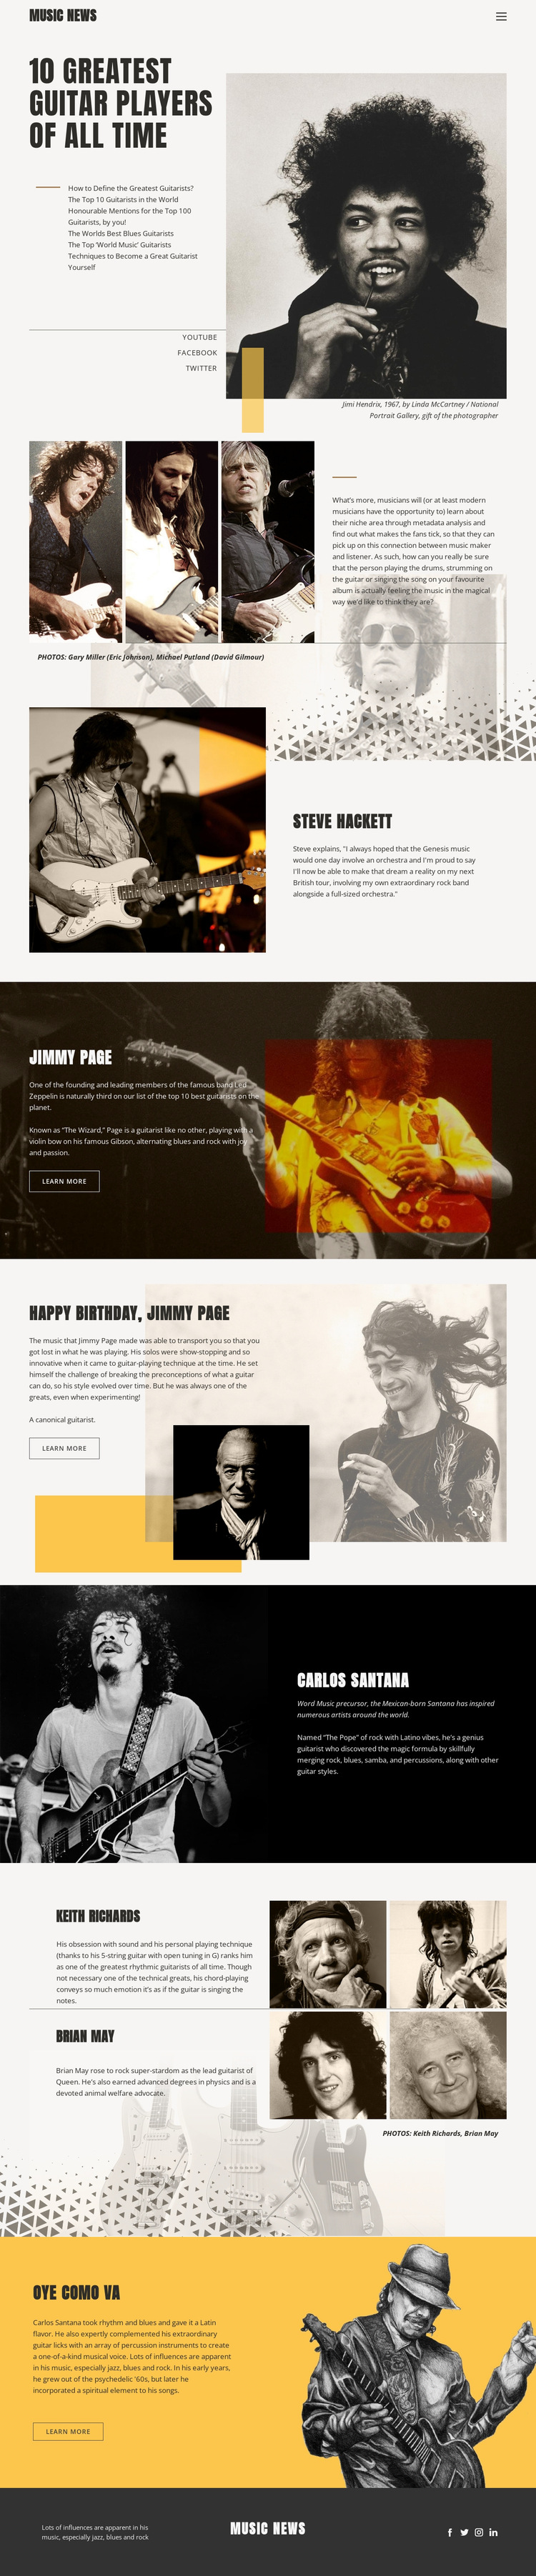 The Top Guitar Players HTML5 Template